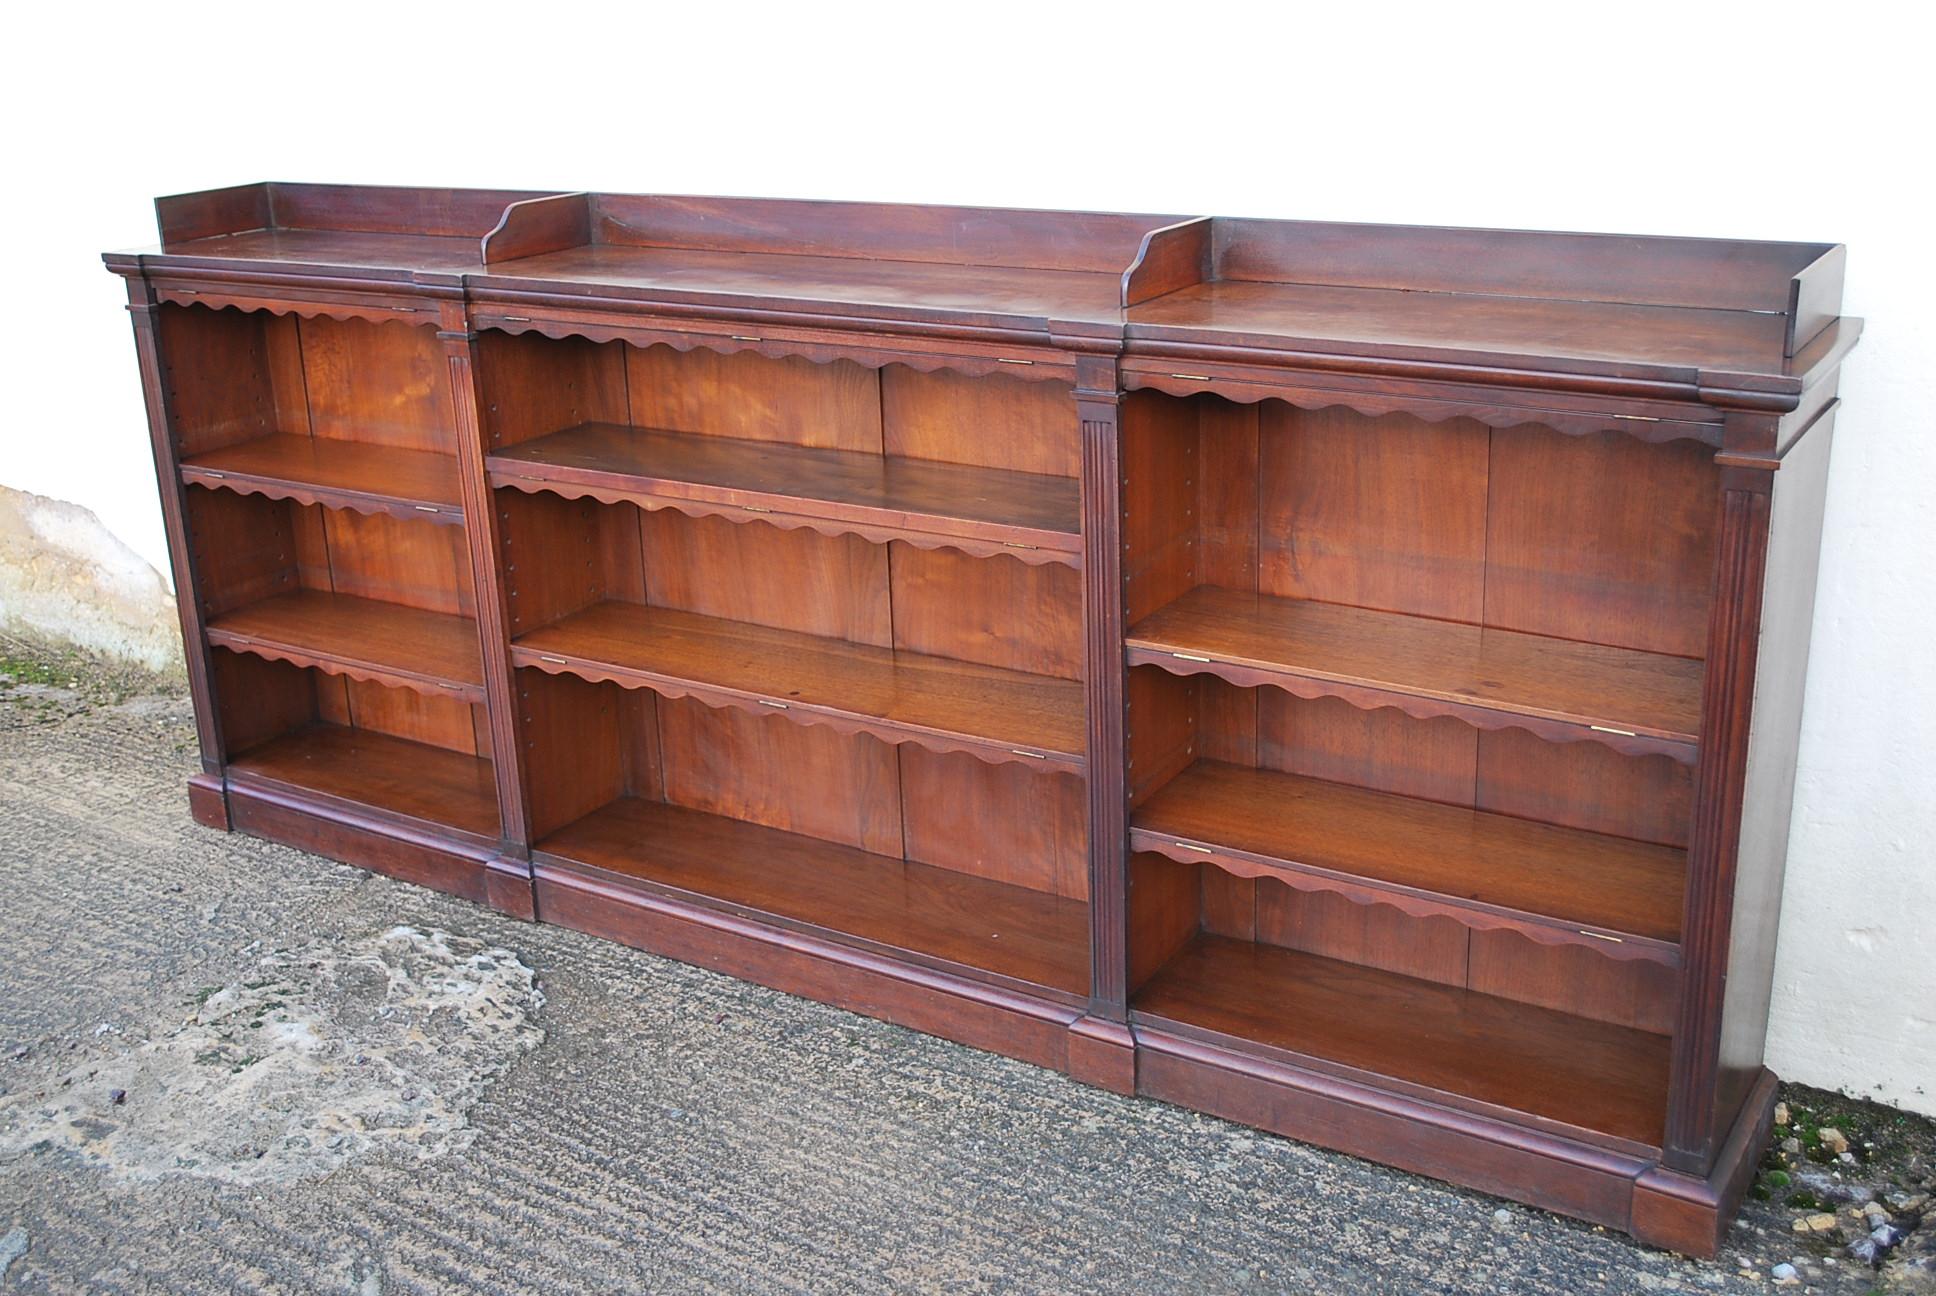 A good quality English breakfront open bookcase with adjustable shelves. Made in solid walnut with good color and patination. A rare example of its kind, with patented book dust covers that fold down rather than leather ones which deteriorate. An